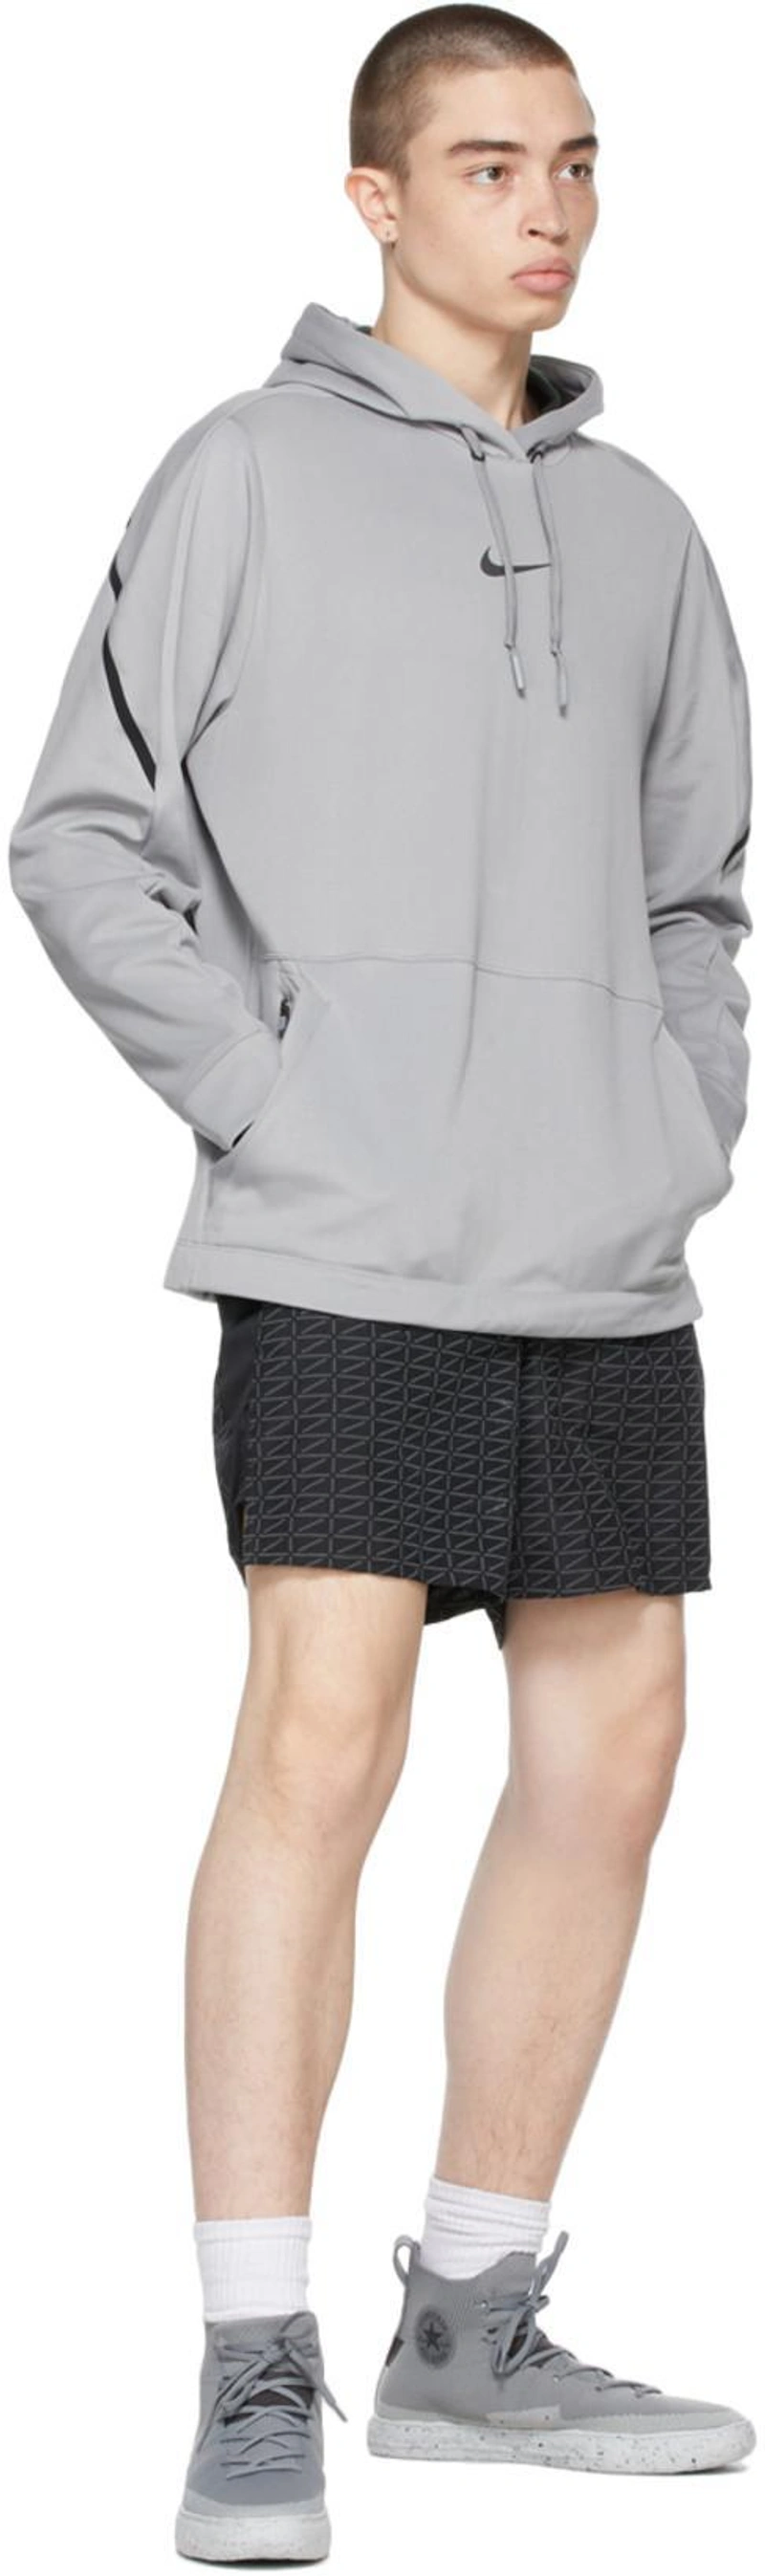 SSENSE's Post | Wearing: Nike Grey & Black Pro Pullover Hoodie In Particle Grey,black; Nike Black Run Logo Shorts In Black/white; Converse Grey Chuck Taylor All Star Crater Knit High Sneakers In Hi Limestone Grey